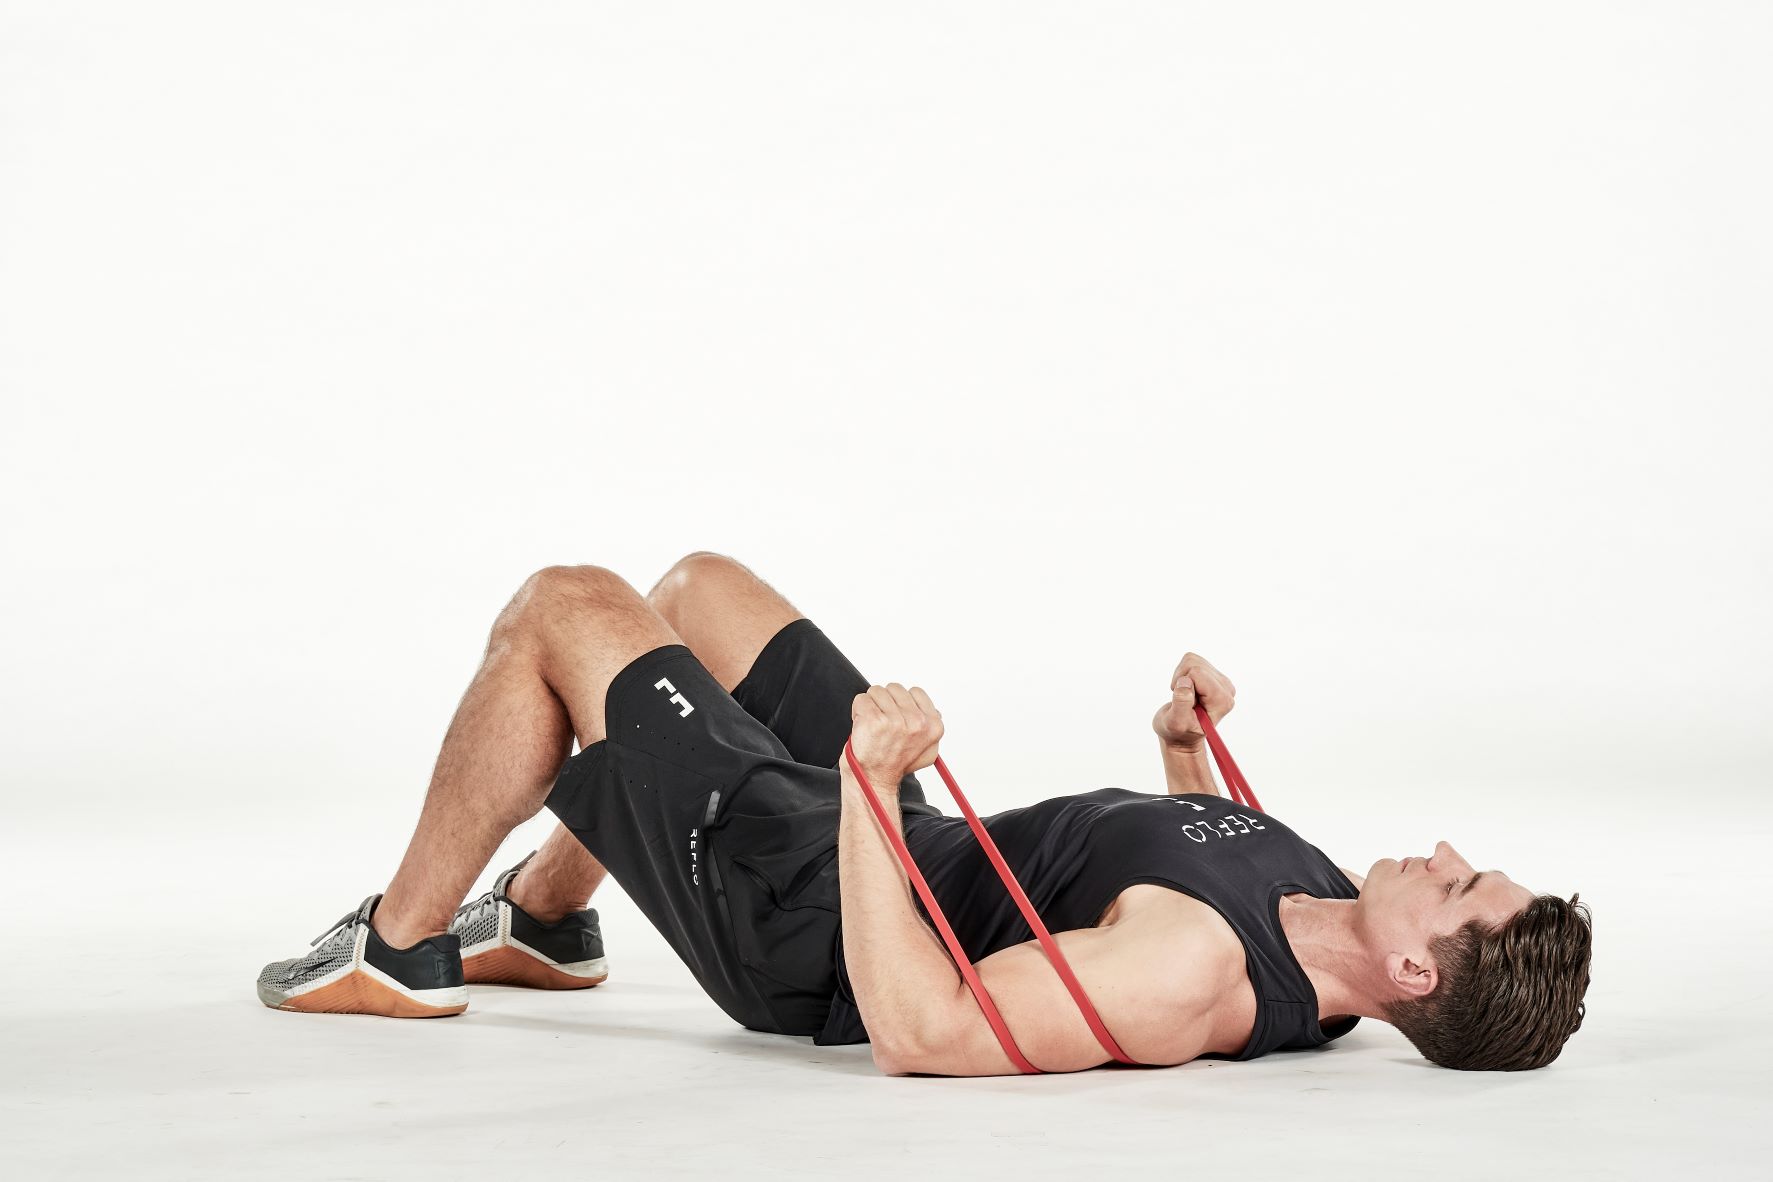 man demonstrating step one of lying chest press; laying on his back with bent knees, the resistance band is passed under his back; his arms are bent as each hand holds one end of the resistance band; he wears a black fitness vest, black shorts and trainers